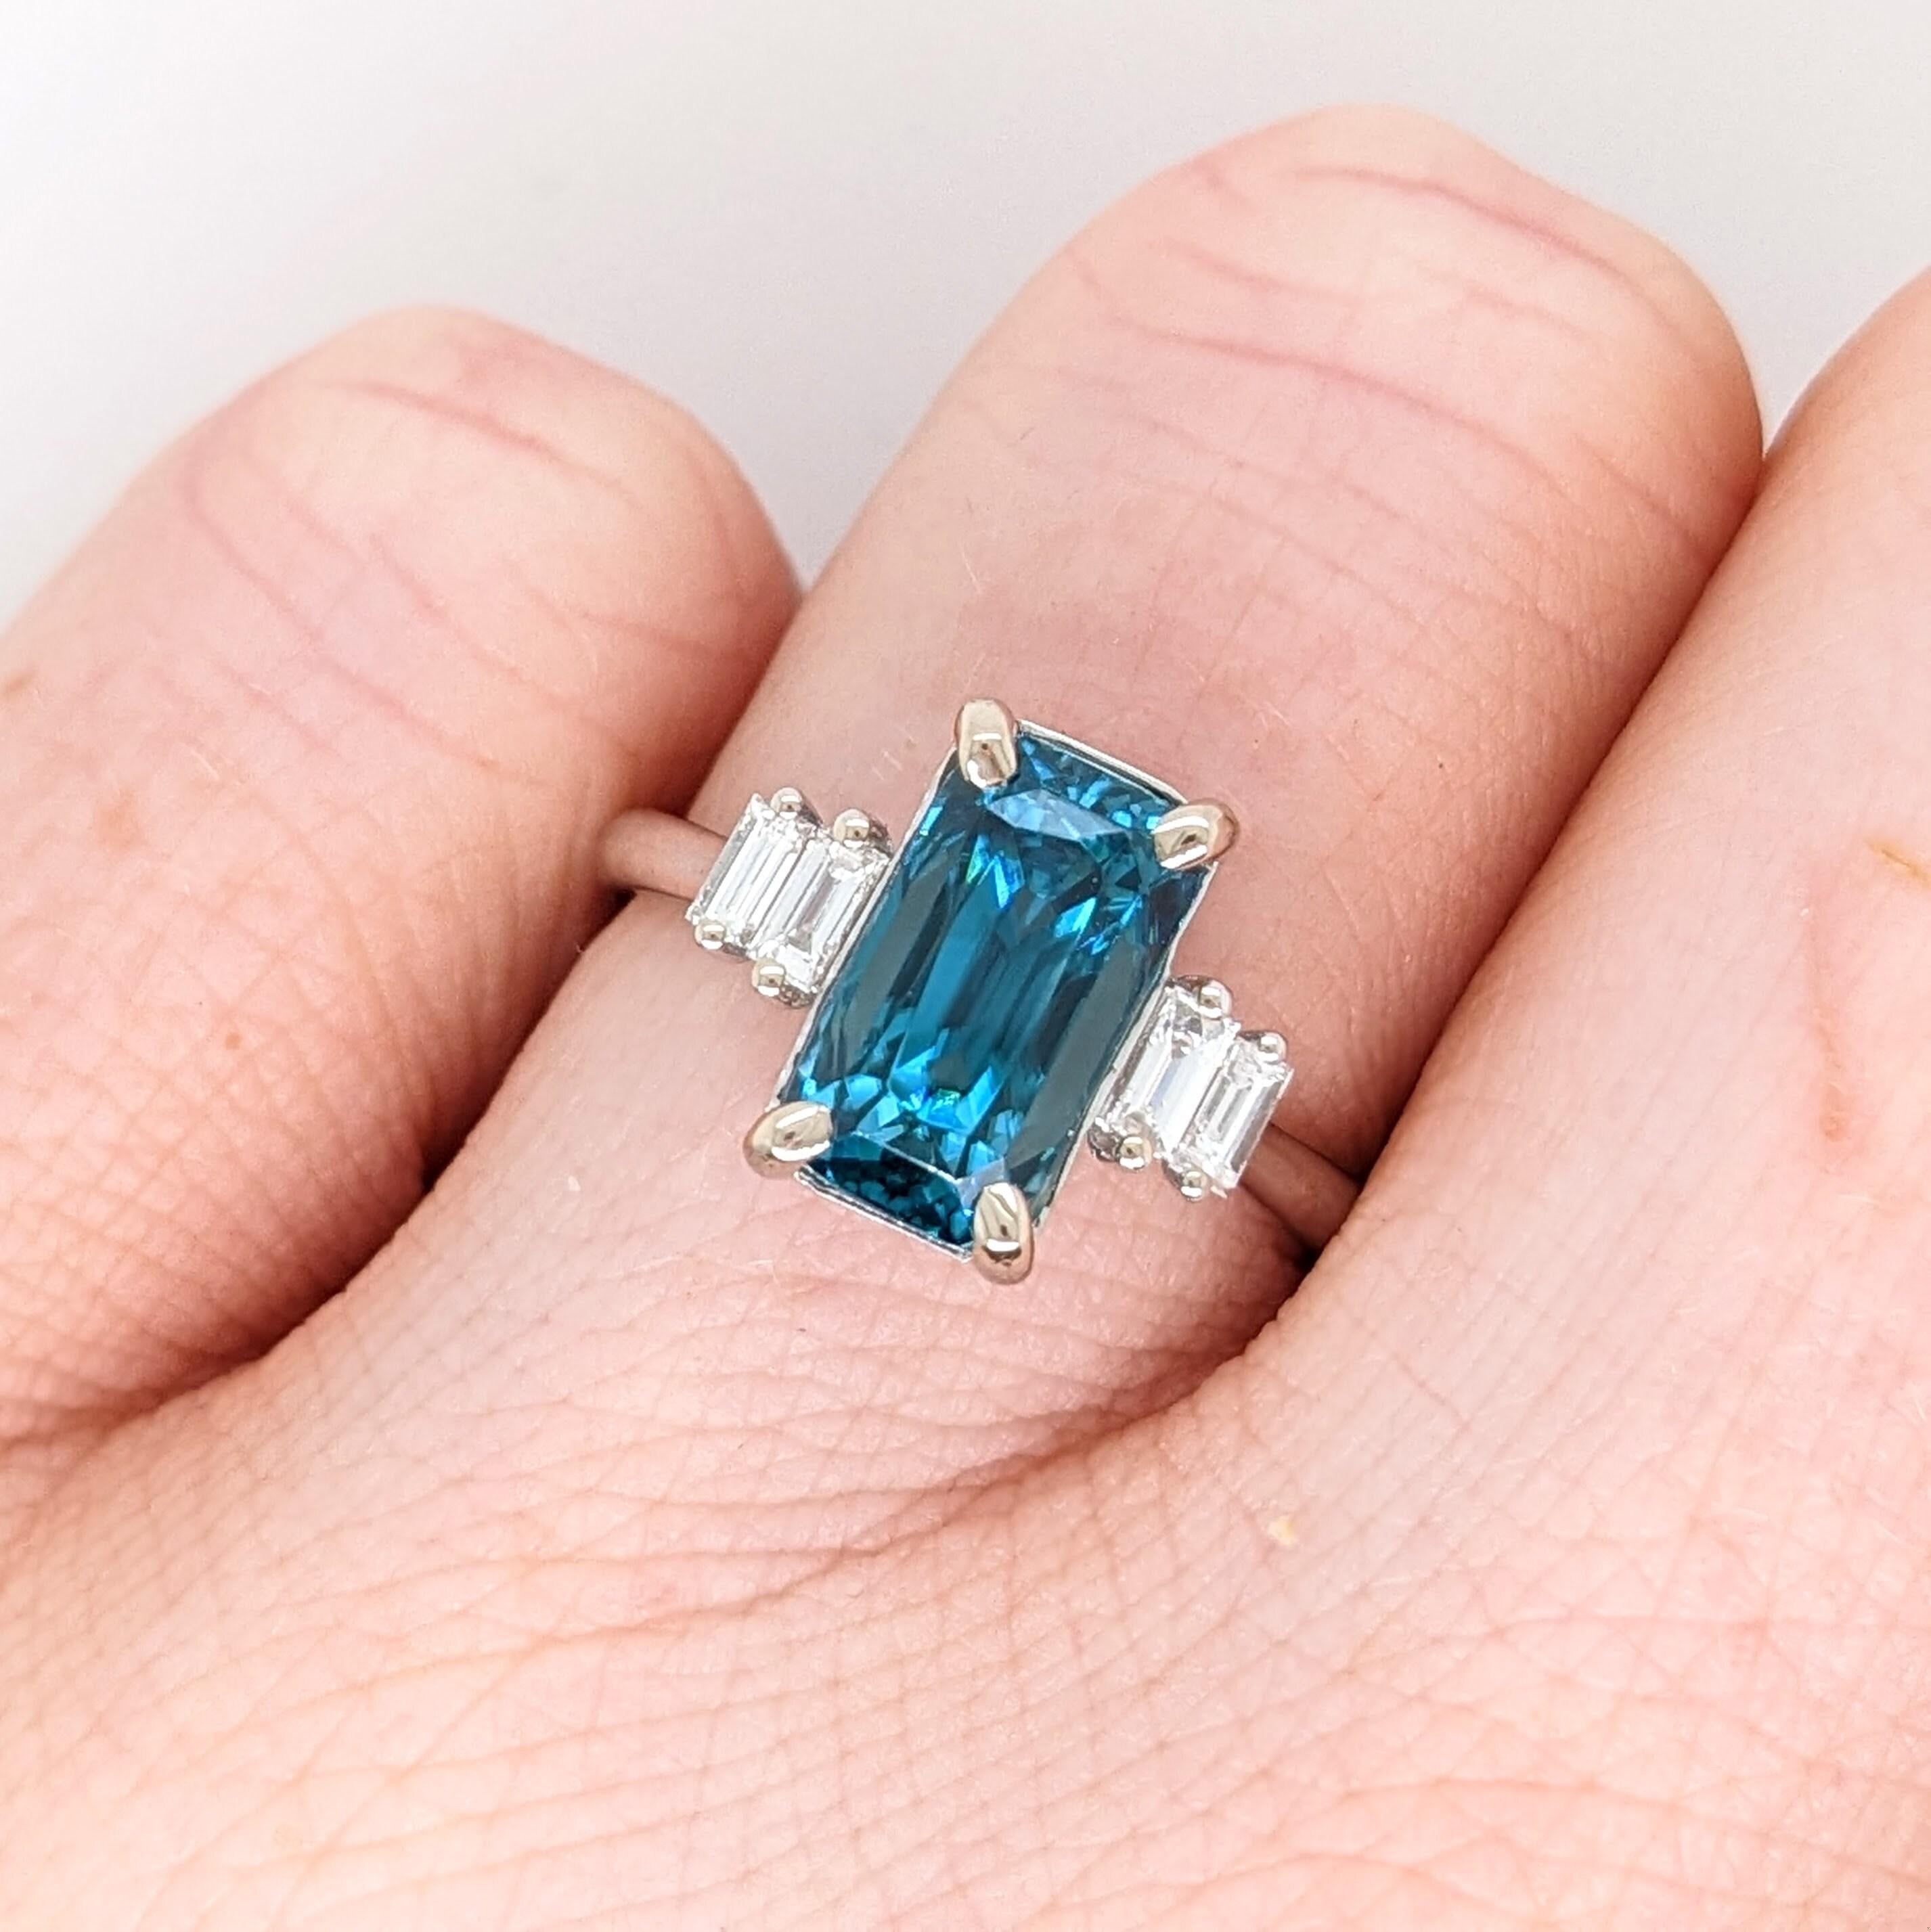 This statement ring features a gorgeous sparkling natural blue zircon in 14K solid white gold with beautiful baguette diamond accents giving it an elegant modern feel. 
Zircons are celebrated for a refractive index that comes closest to diamonds,